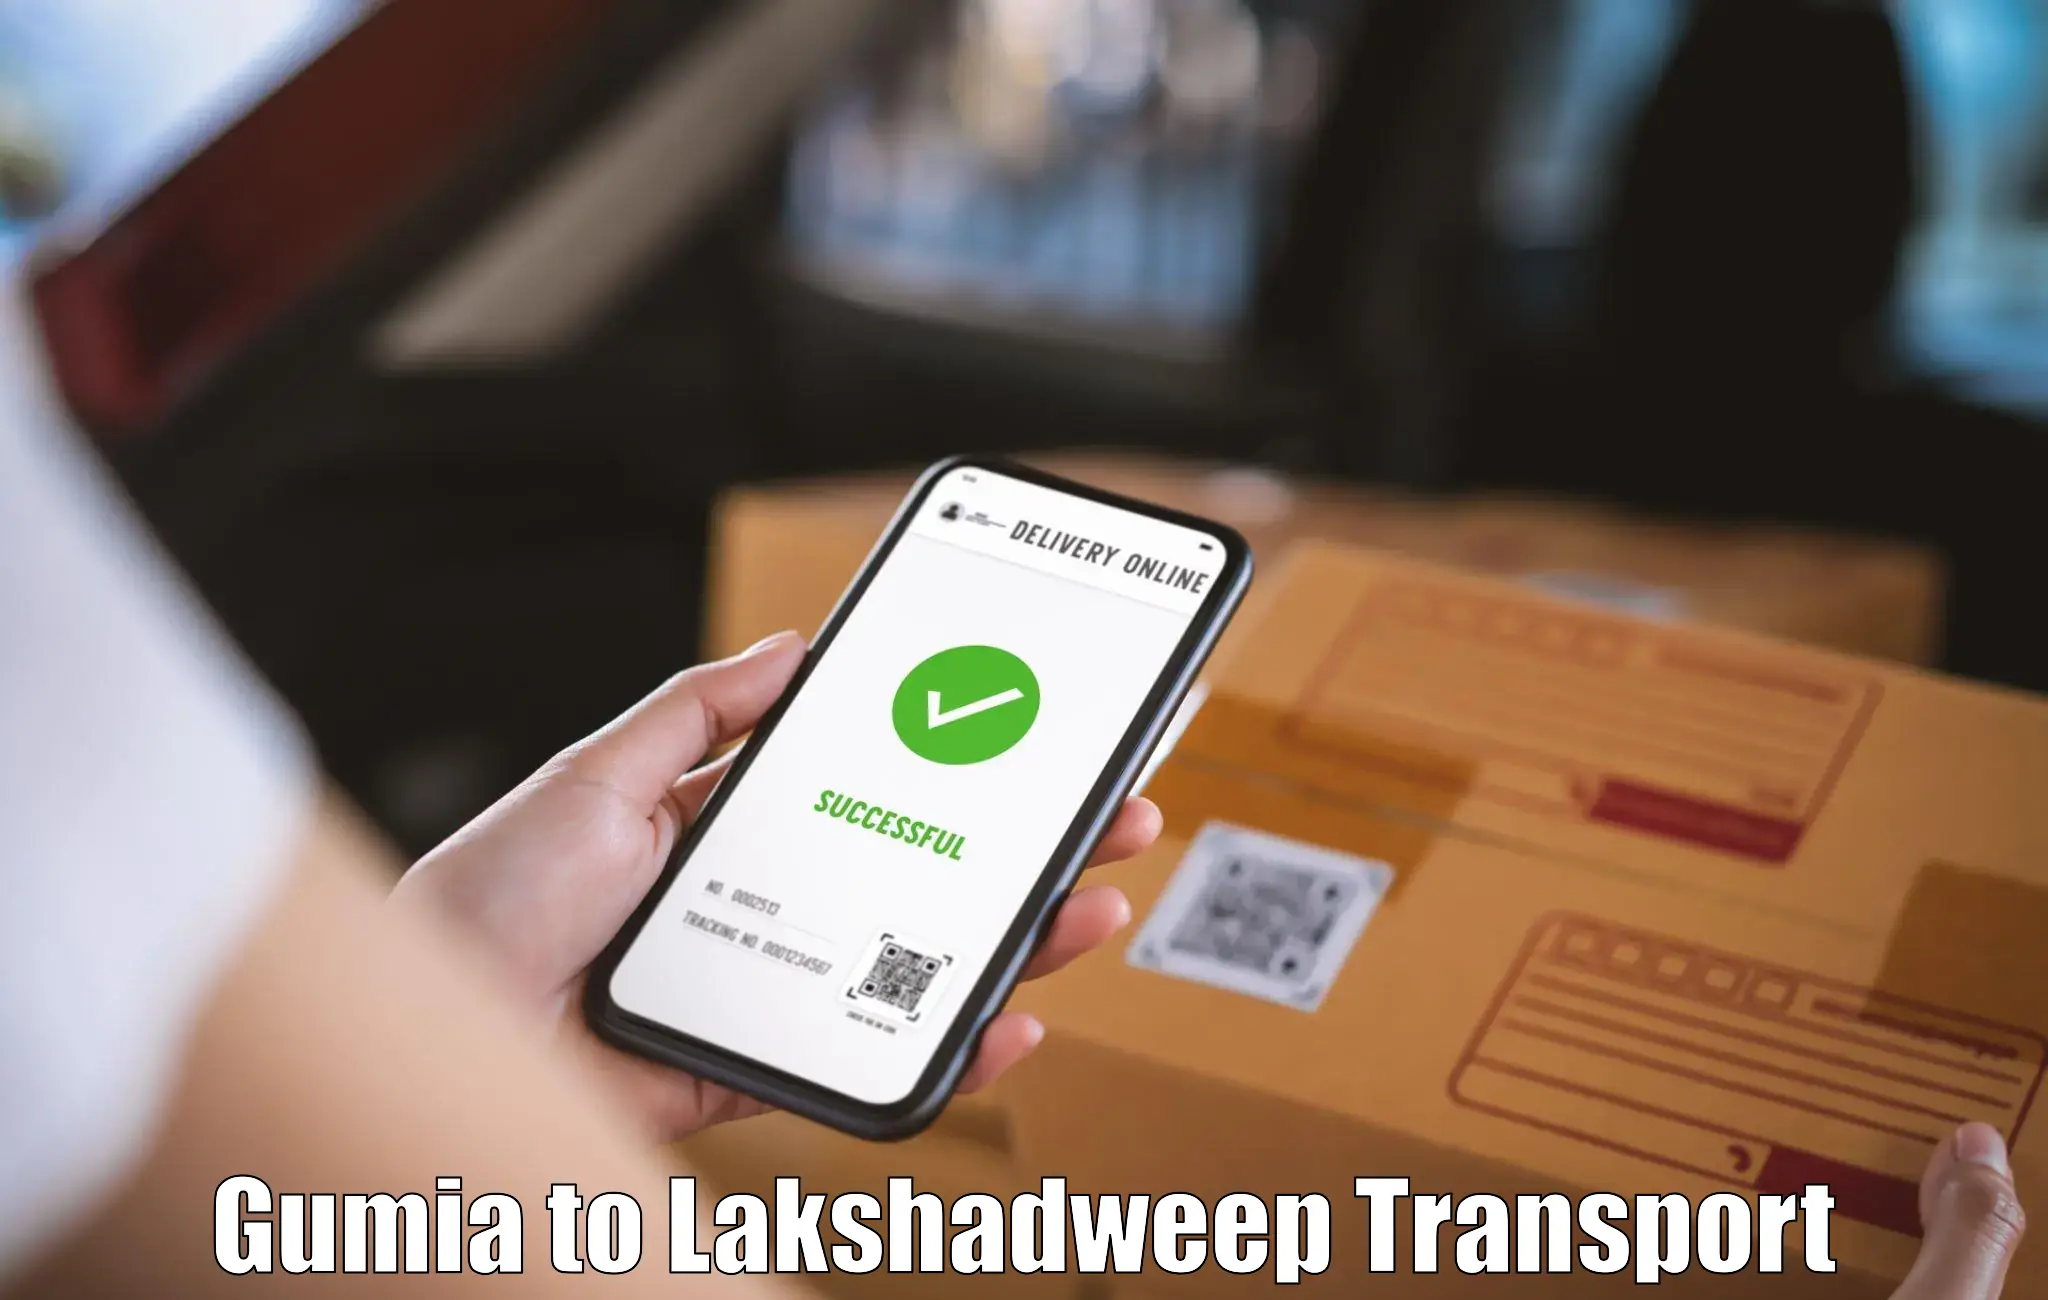 Two wheeler transport services Gumia to Lakshadweep